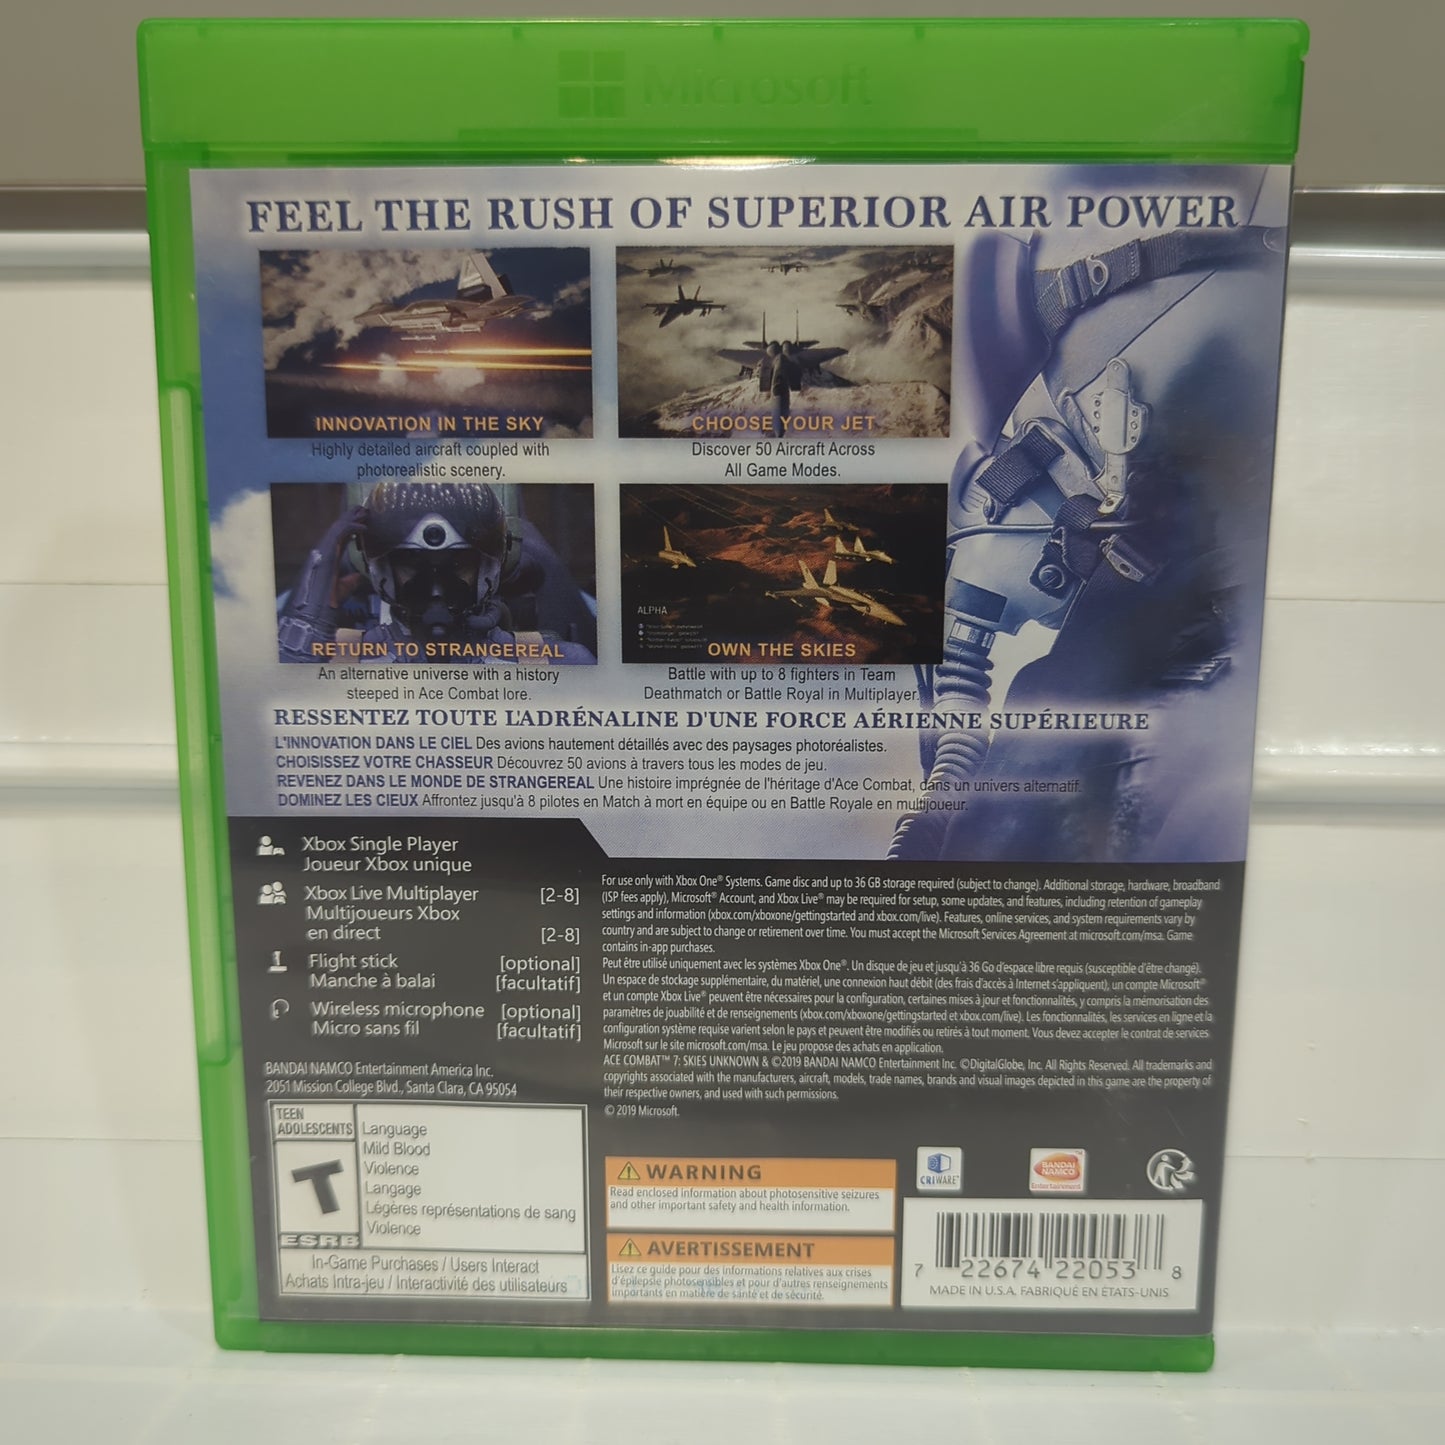 Ace Combat 7 Skies Unknown - Xbox One